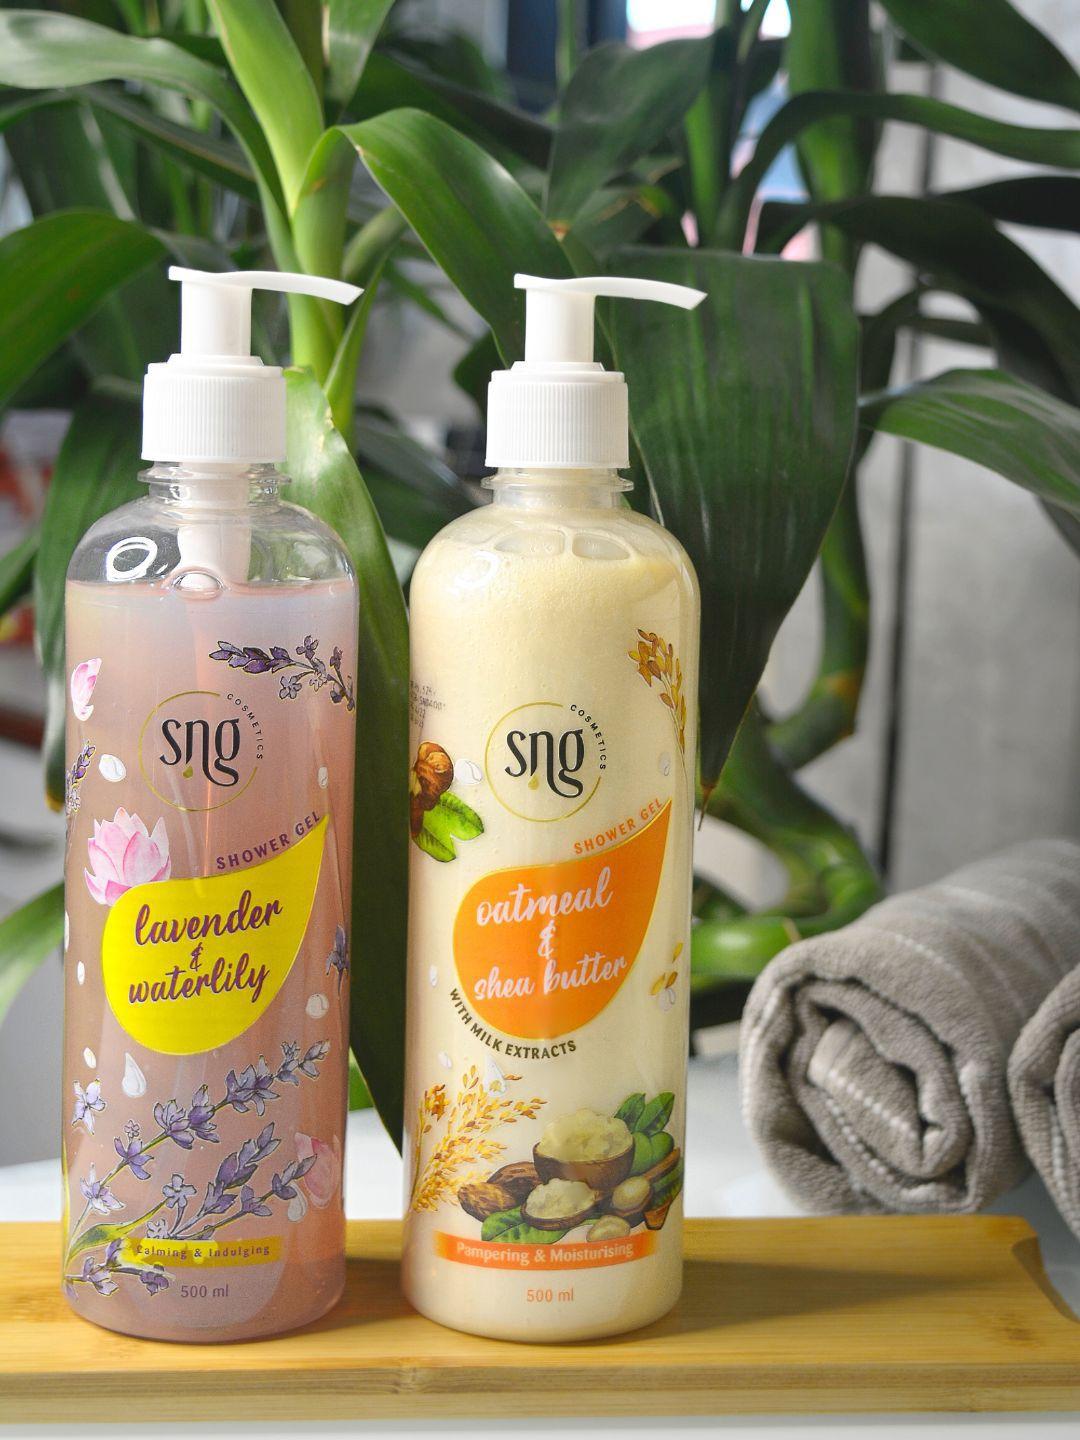 SNG Cosmetics Set Of 2 Lavender & Waterlily & Oatmeal & Shea Butter Shower Gels-500ml Each